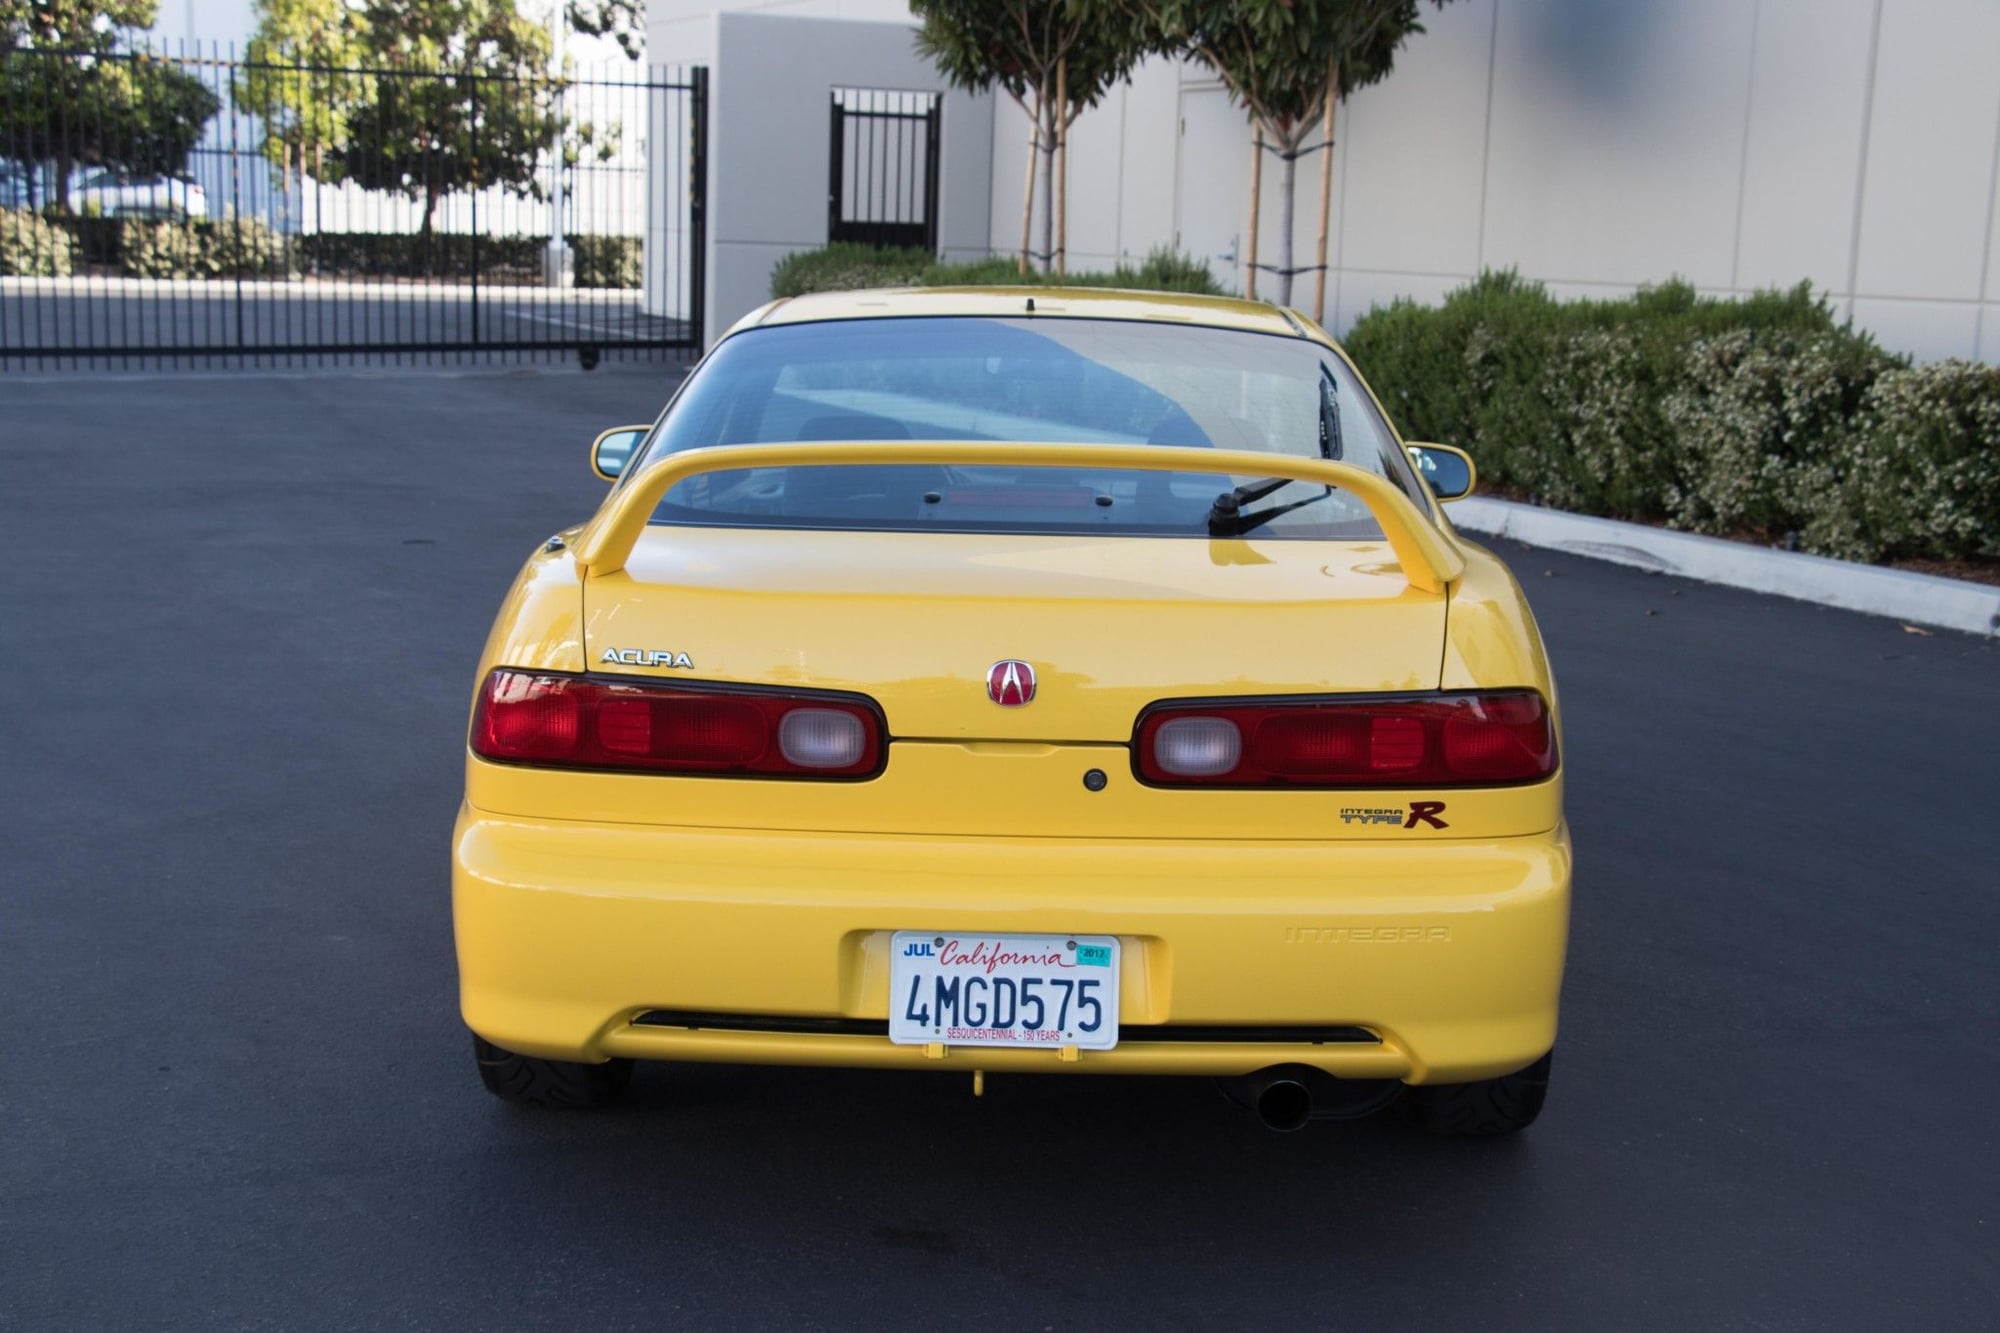 2000 Acura Integra - 2000 Acura Integra Type R *Phoenix Yellow, 47k miles, 3 Owners, original paint* - Used - VIN JH4DC2314YS005225 - 47,000 Miles - 4 cyl - 2WD - Manual - Hatchback - Yellow - Fountain Valley, CA 92708, United States